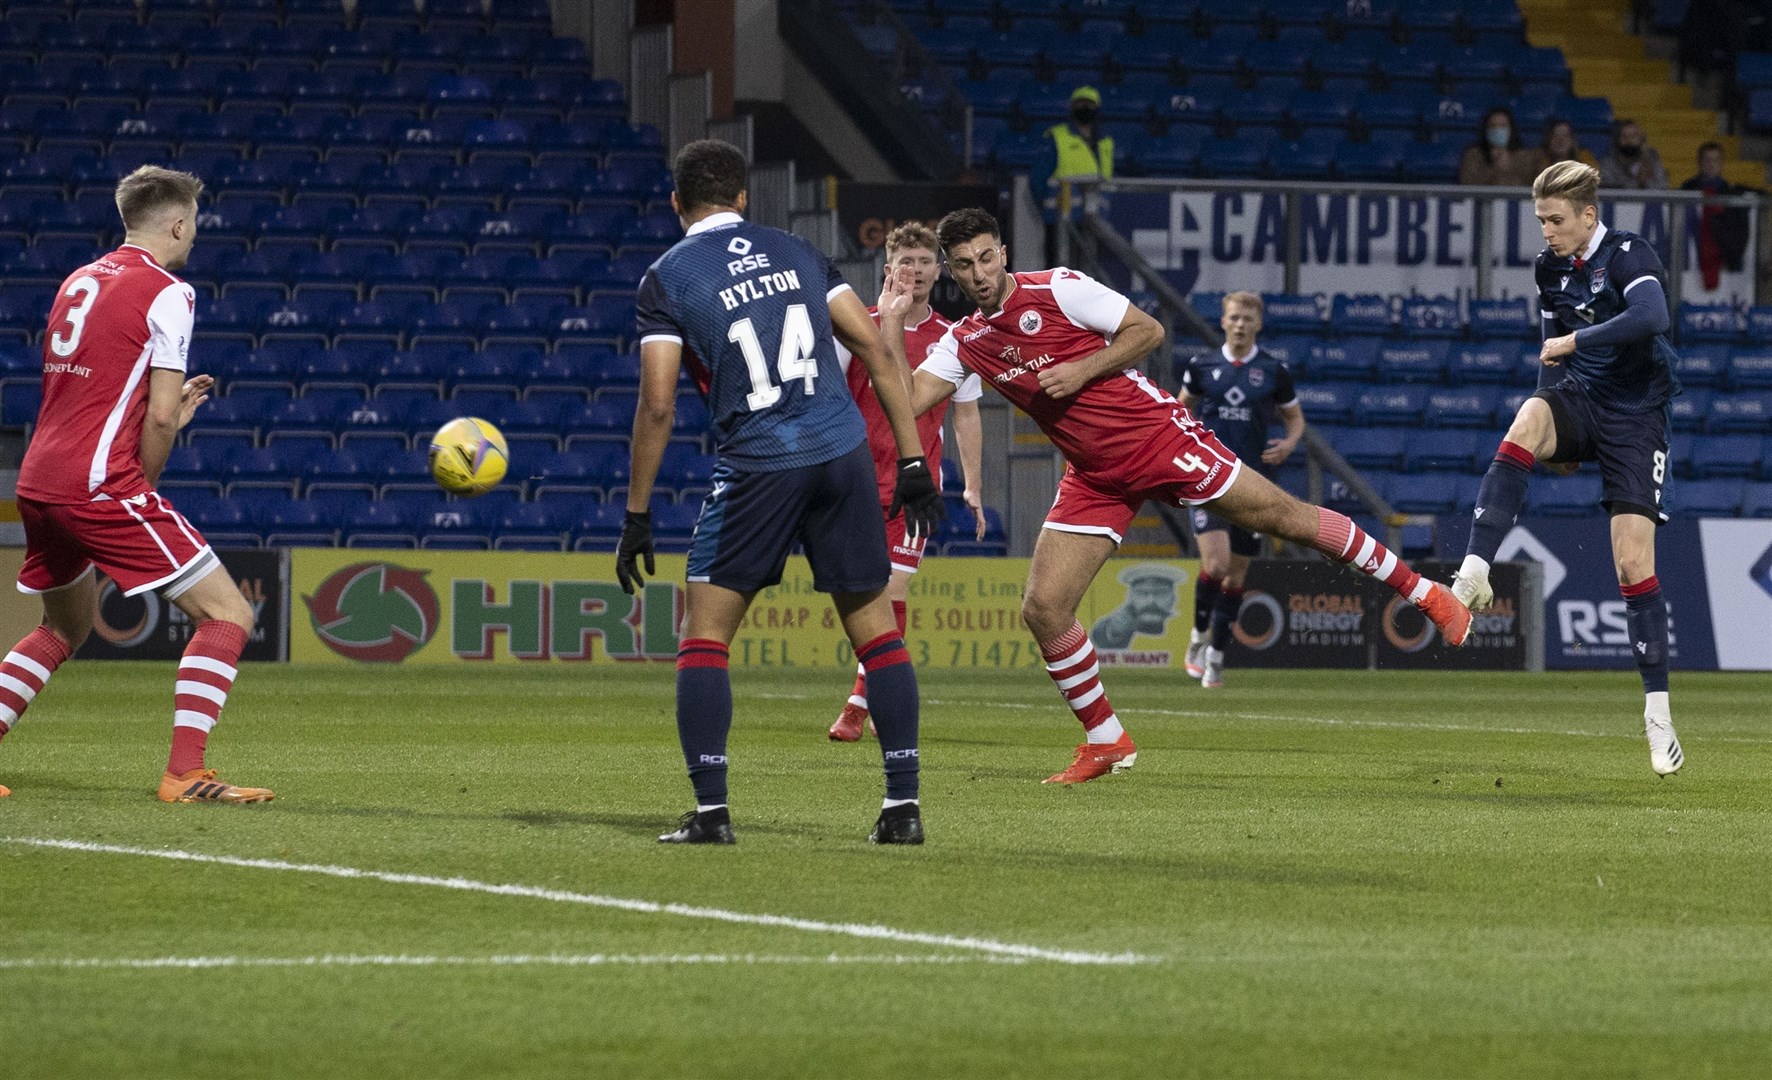 Picture - Ken Macpherson, Inverness. Betfred Cup Group stage. Ross County(3) v Stirling Albion(0). 14.11.20. Ross County's Oli Shaw openinng goal.